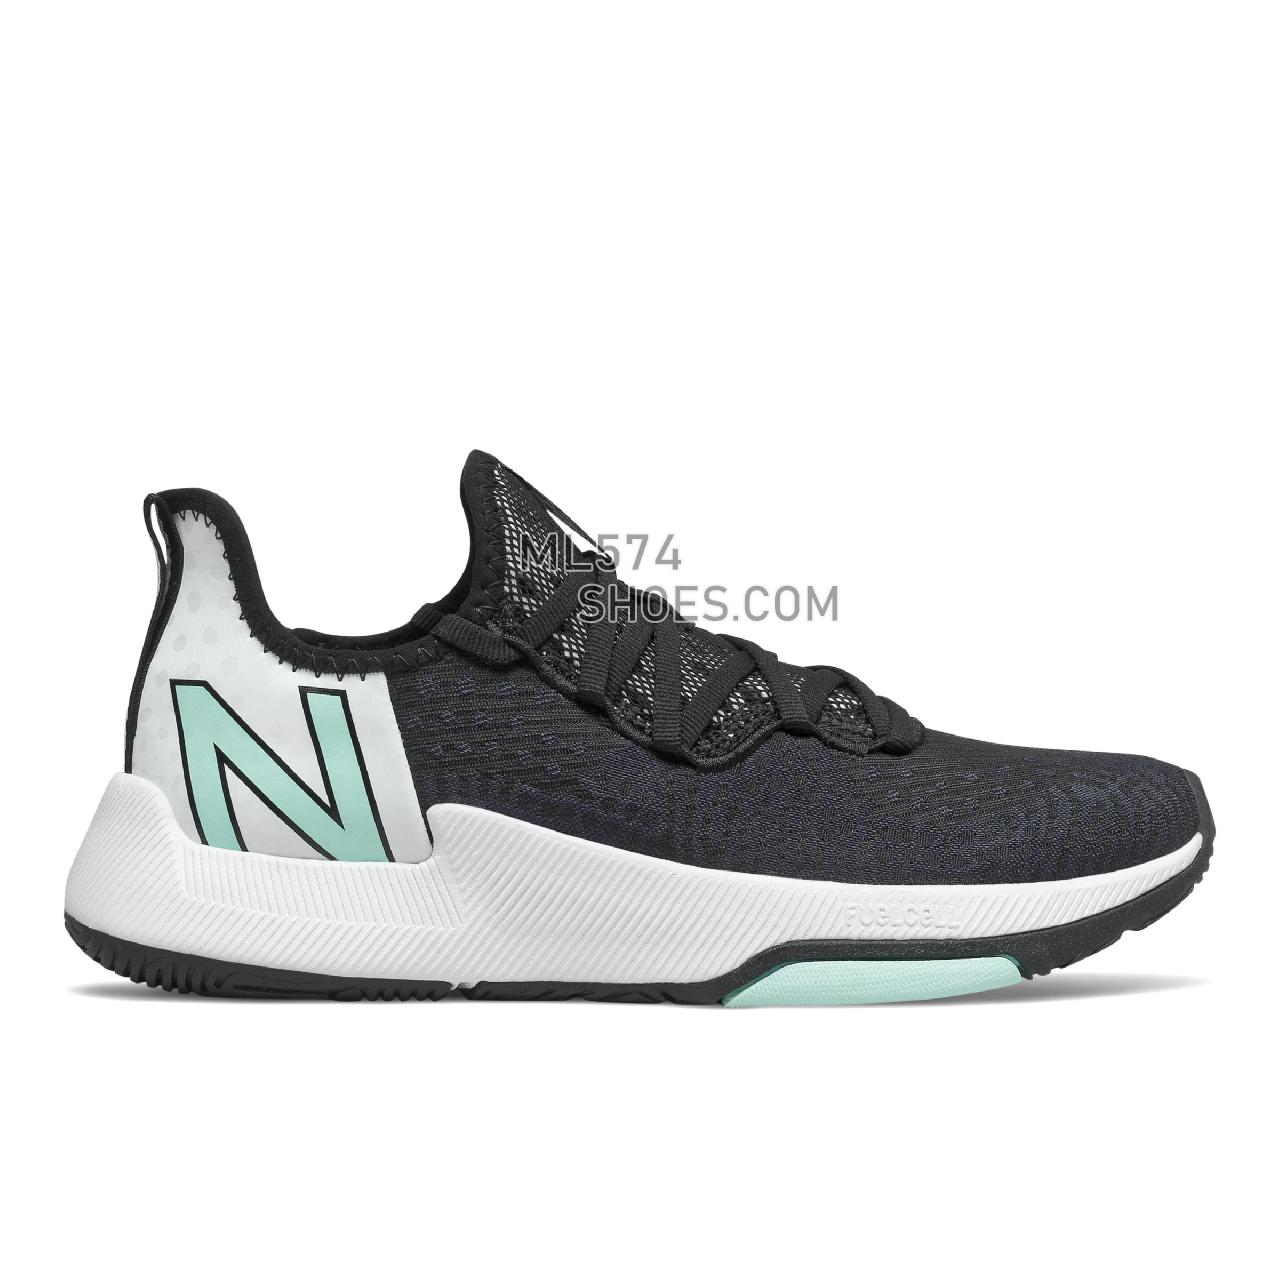 New Balance FuelCell 100 - Women's Workout - Black with Outerspace and White Mint - WXM100LK